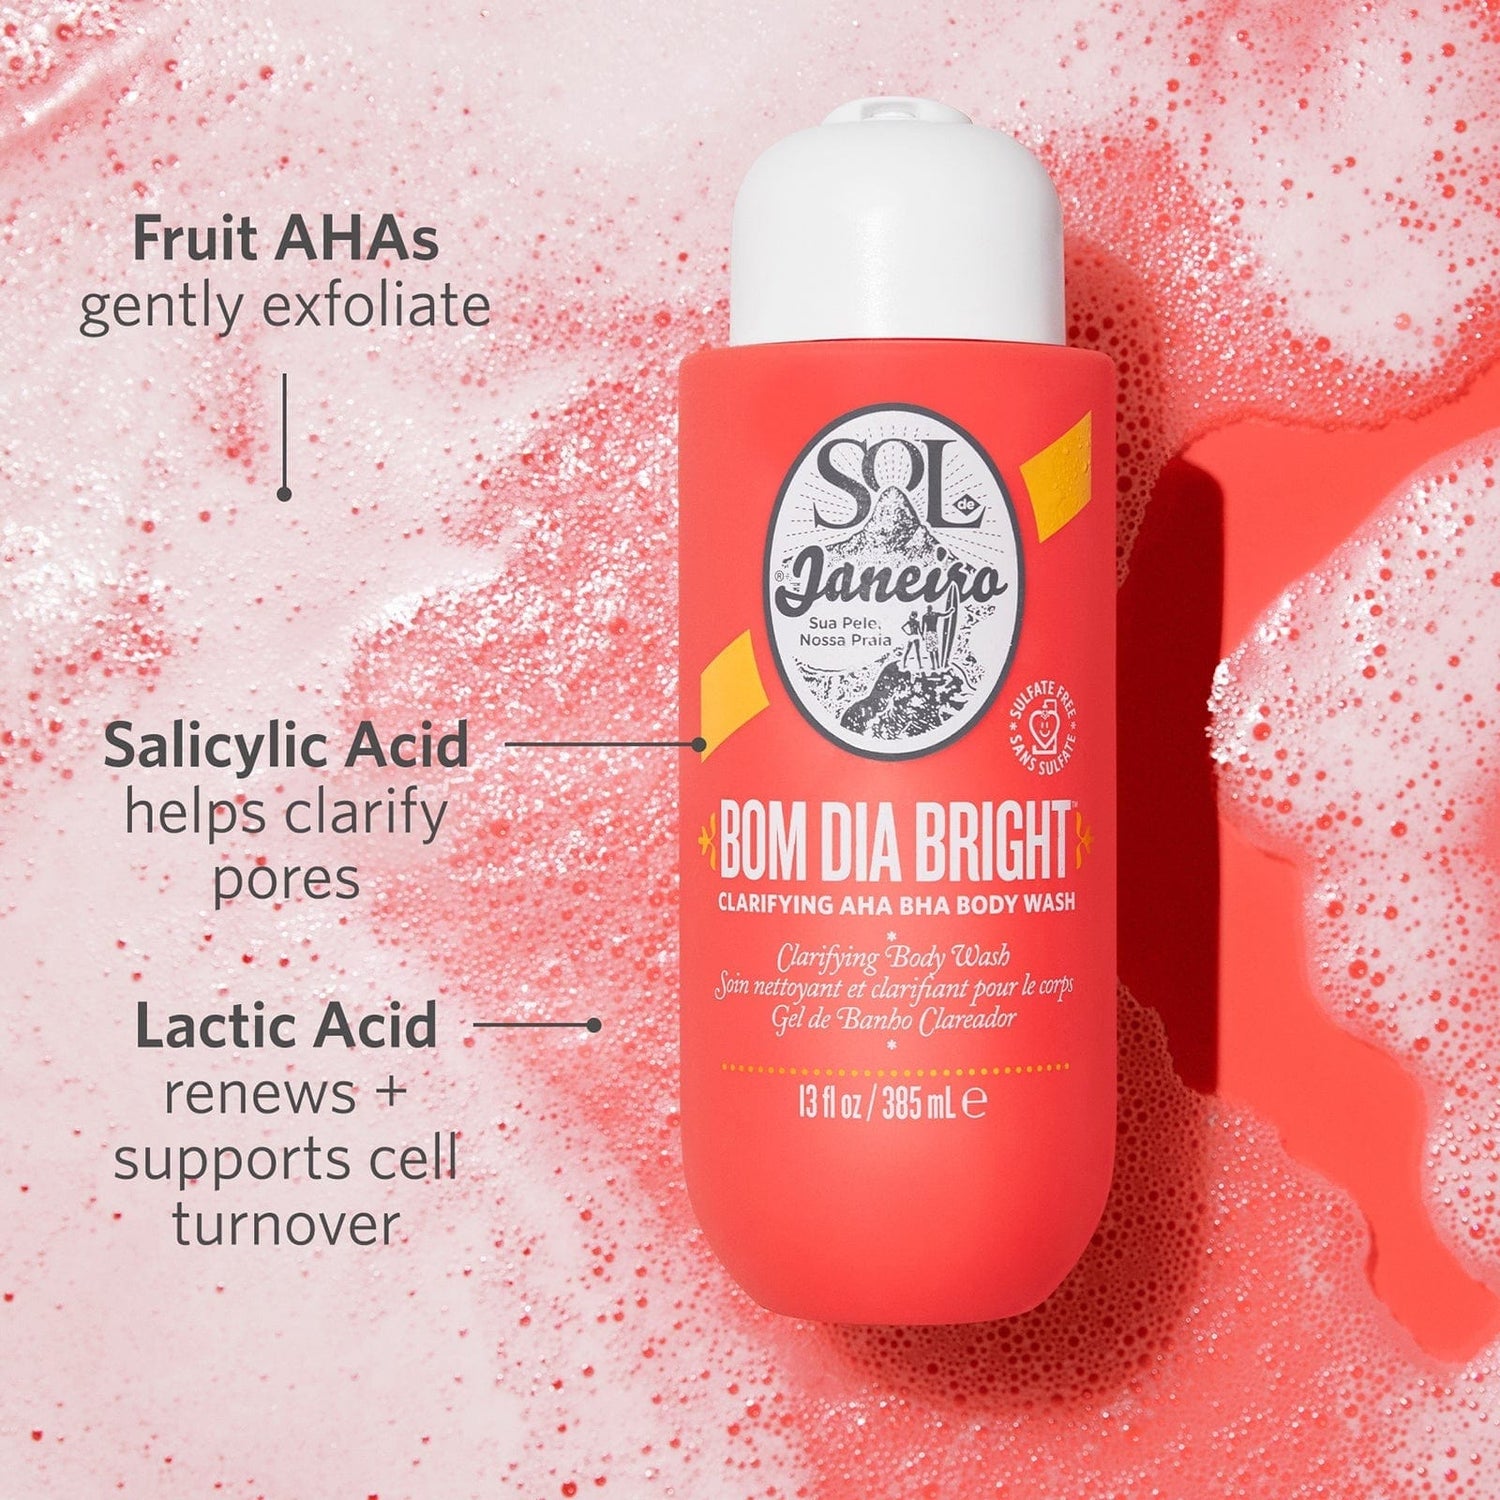 Fruit AHAs gently exfoliate, salicylic acid helps clarify pores, lactic acid renews + supports cell turnover